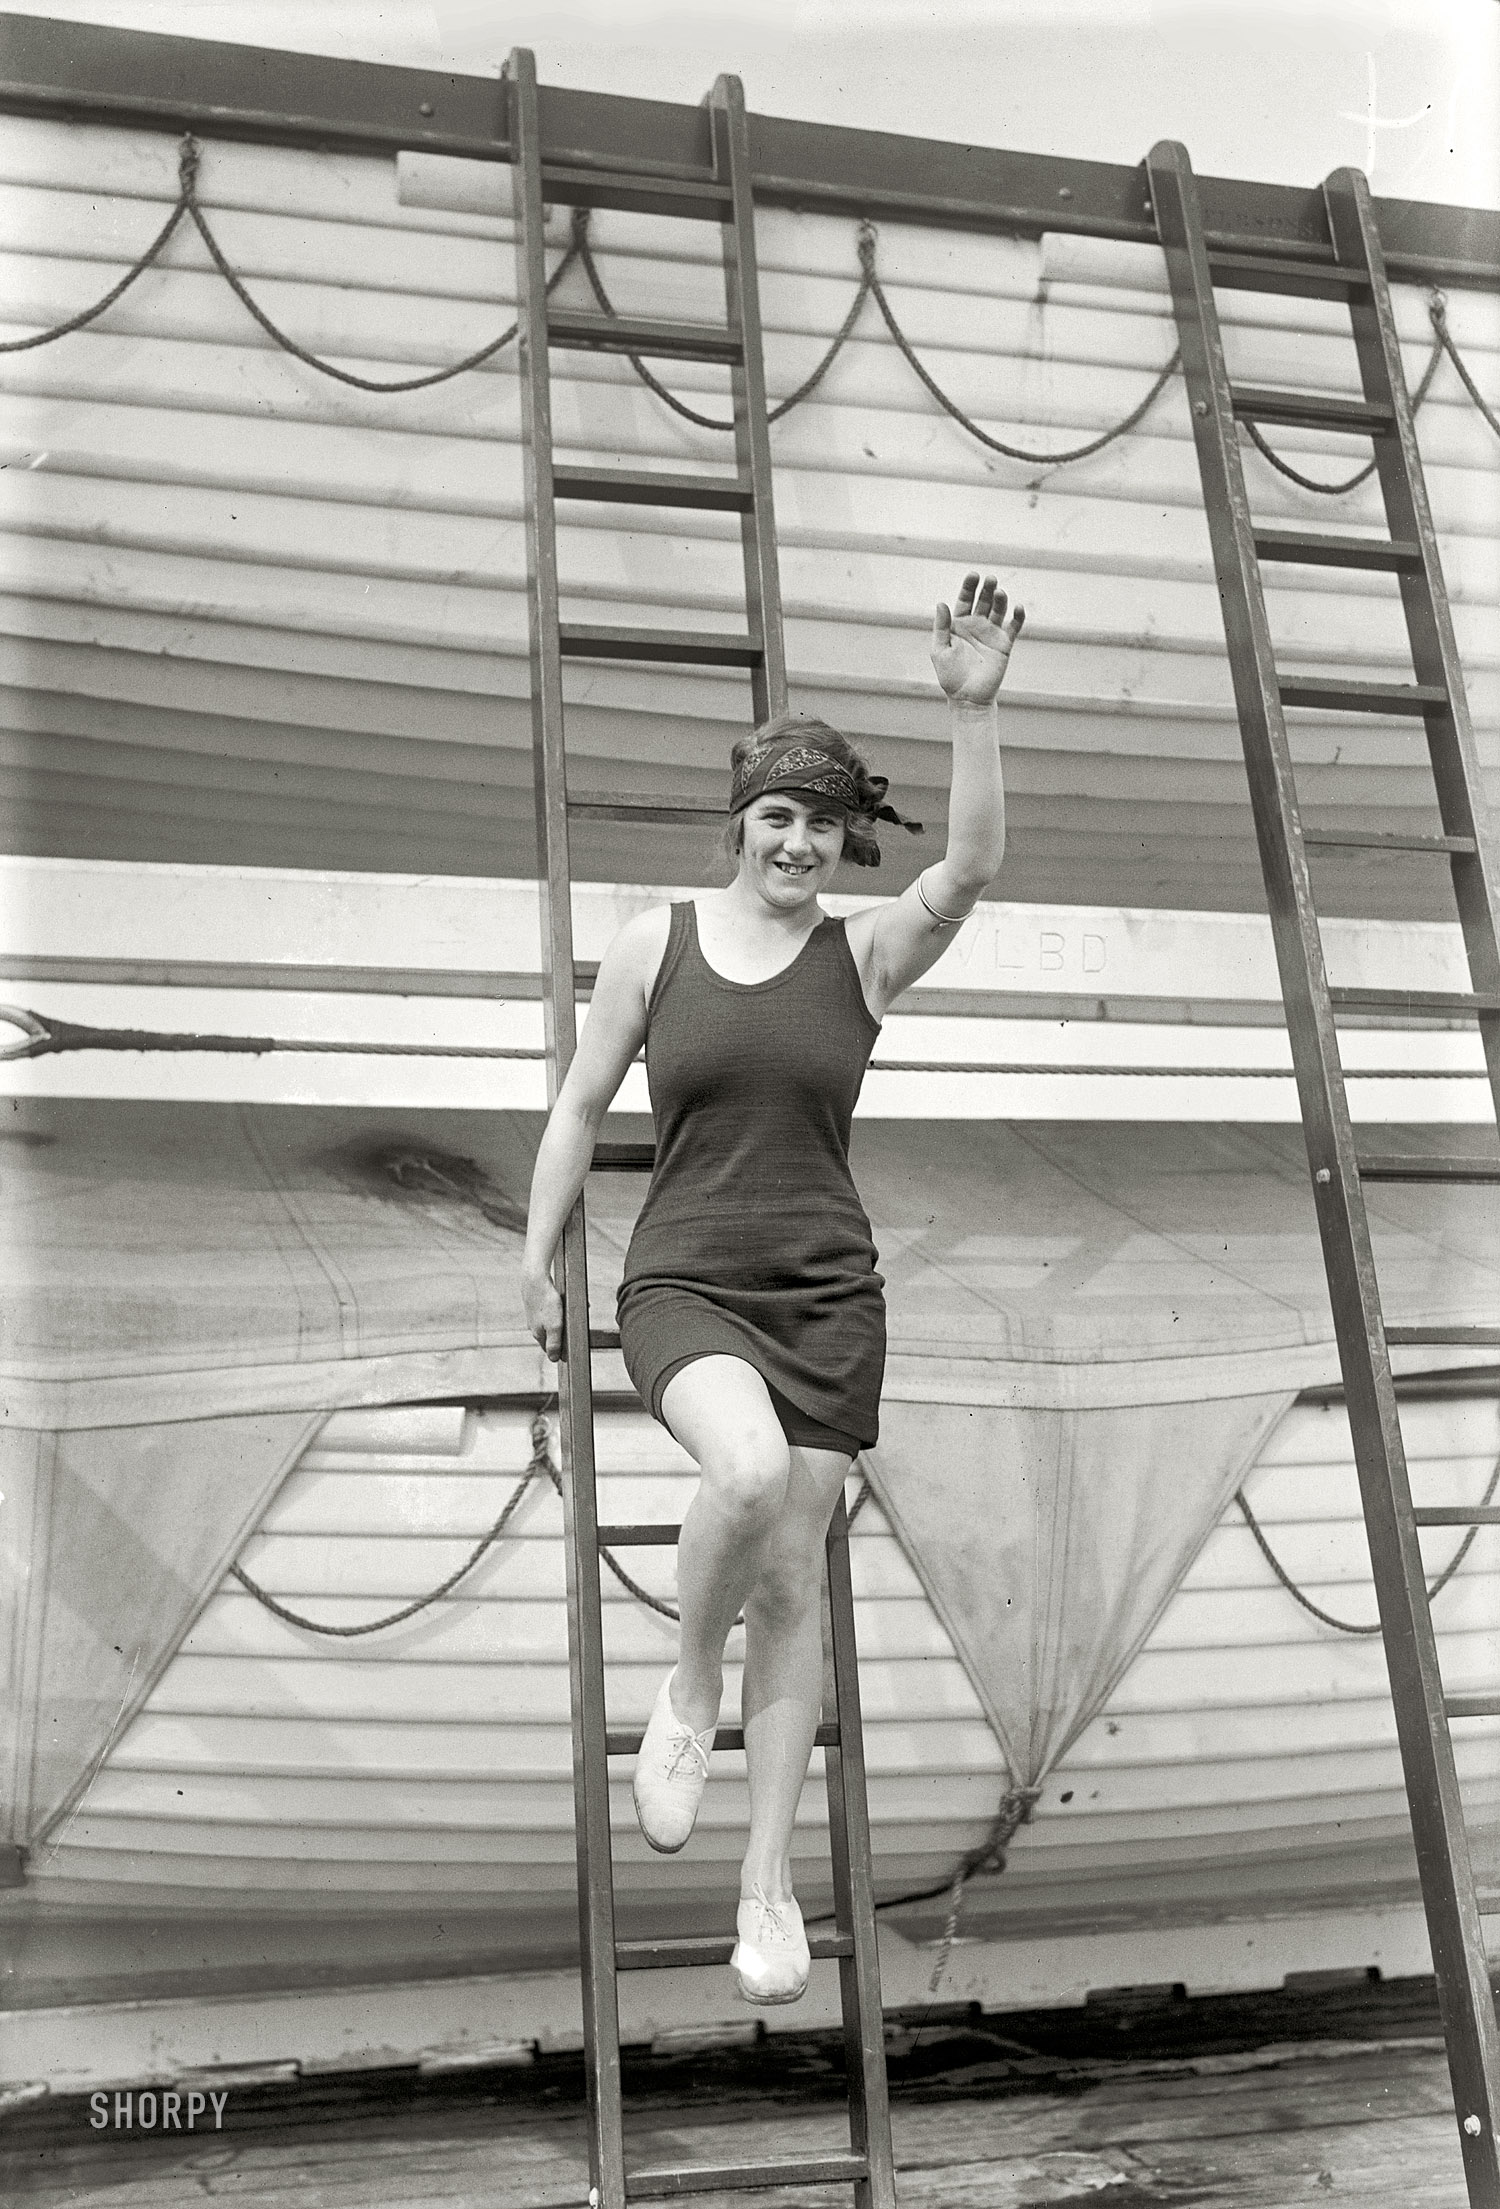 September 1925. "Hilda James." The British swimmer and Olympic medalist shipboard in New York Harbor after retiring from amateur sports to "preside over the pool in a new transatlantic liner." Bain News Service. View full size.